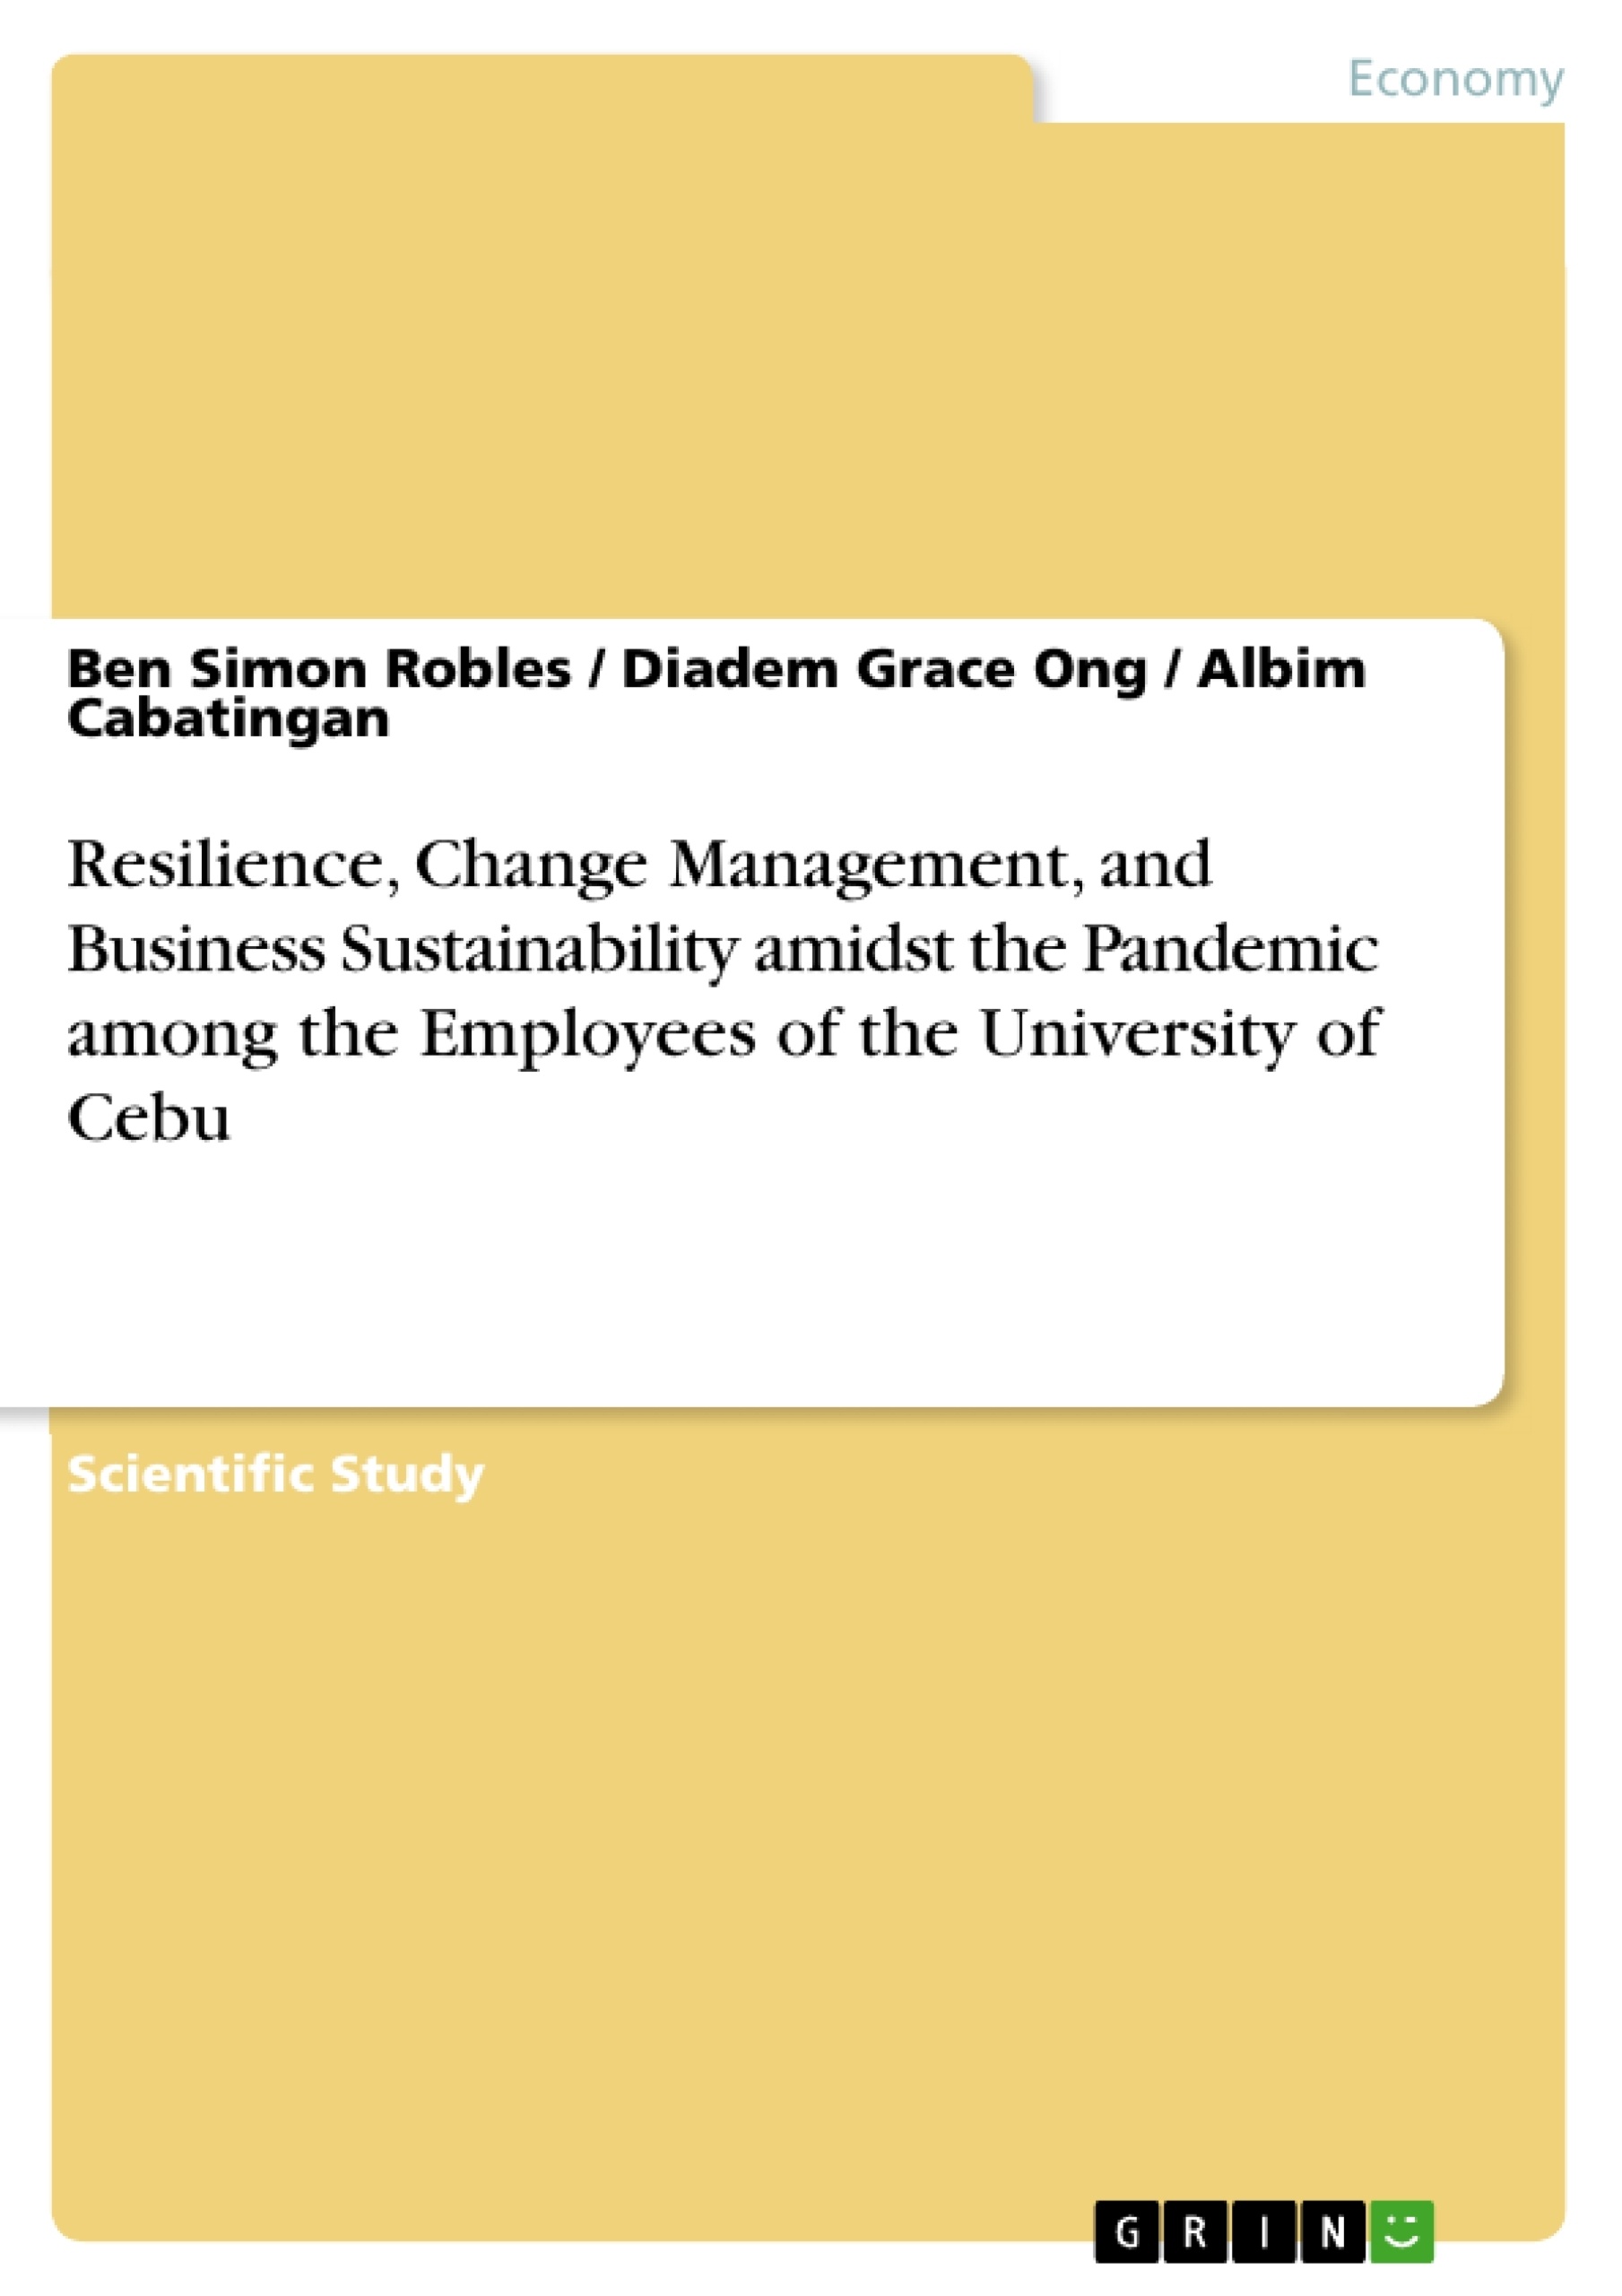 Title: Resilience, Change Management, and Business Sustainability amidst the Pandemic among the Employees of the University of Cebu